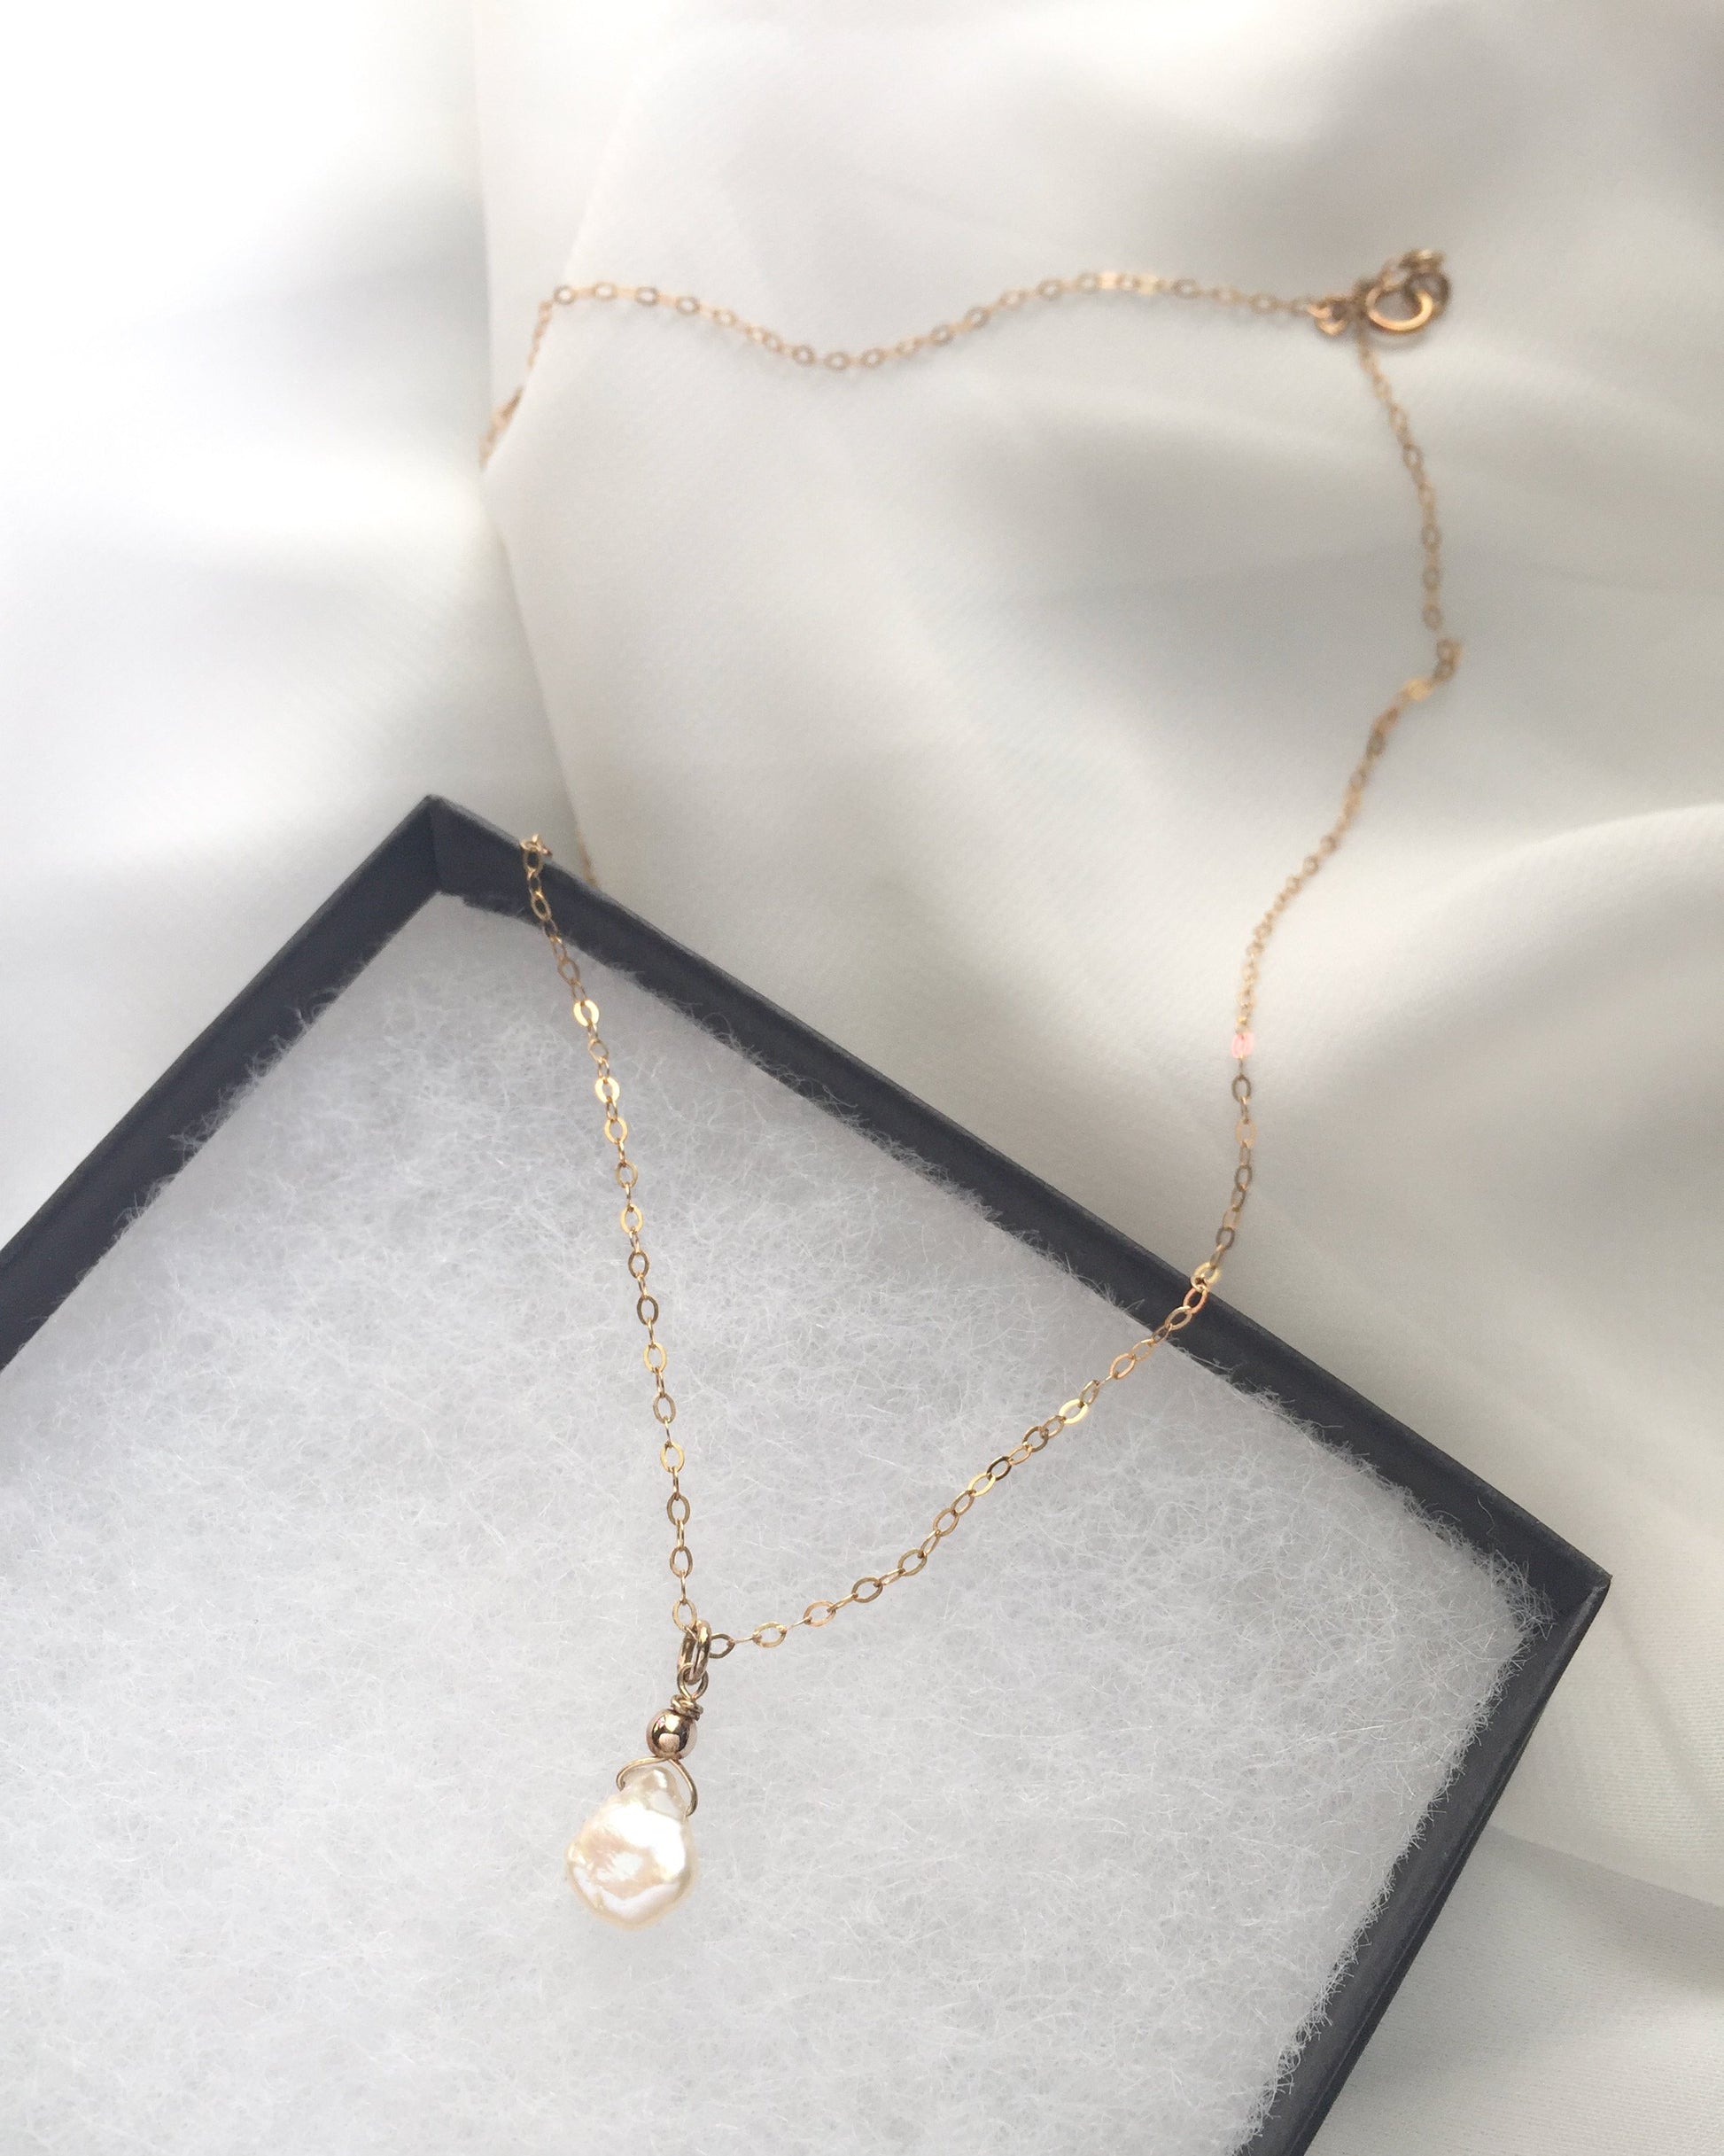 50th Birthday Necklace | 50th Birthday Jewelry For Mom Aunt or Sister | Dainty Pearl Necklace | IB Jewelry